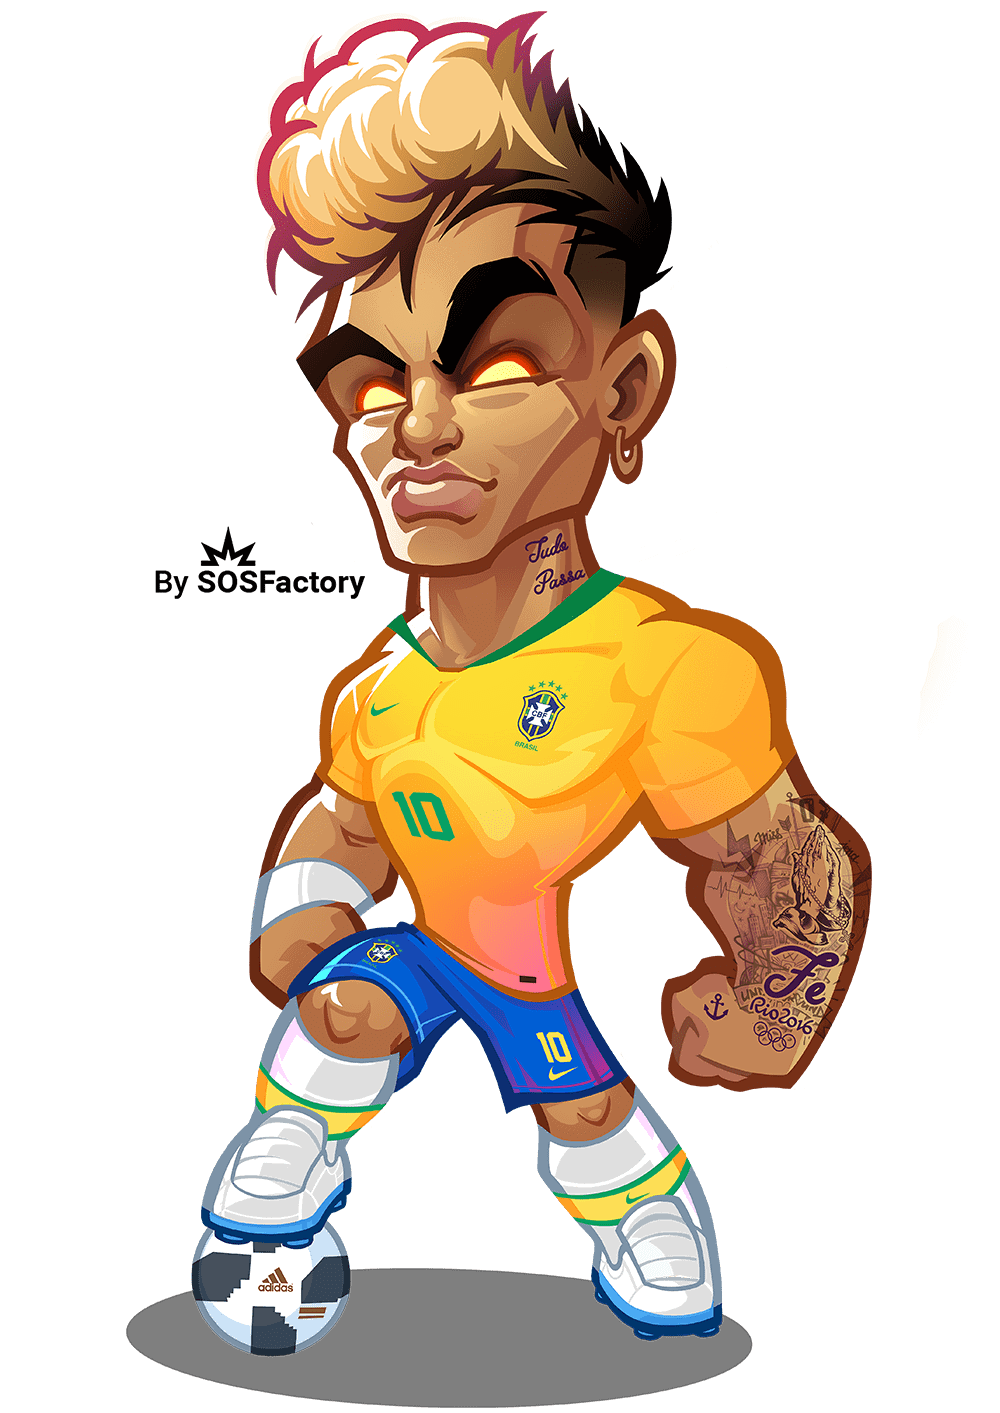 | Worldcup Russia 2018 Mascotization: cartoon mascot characters of 15